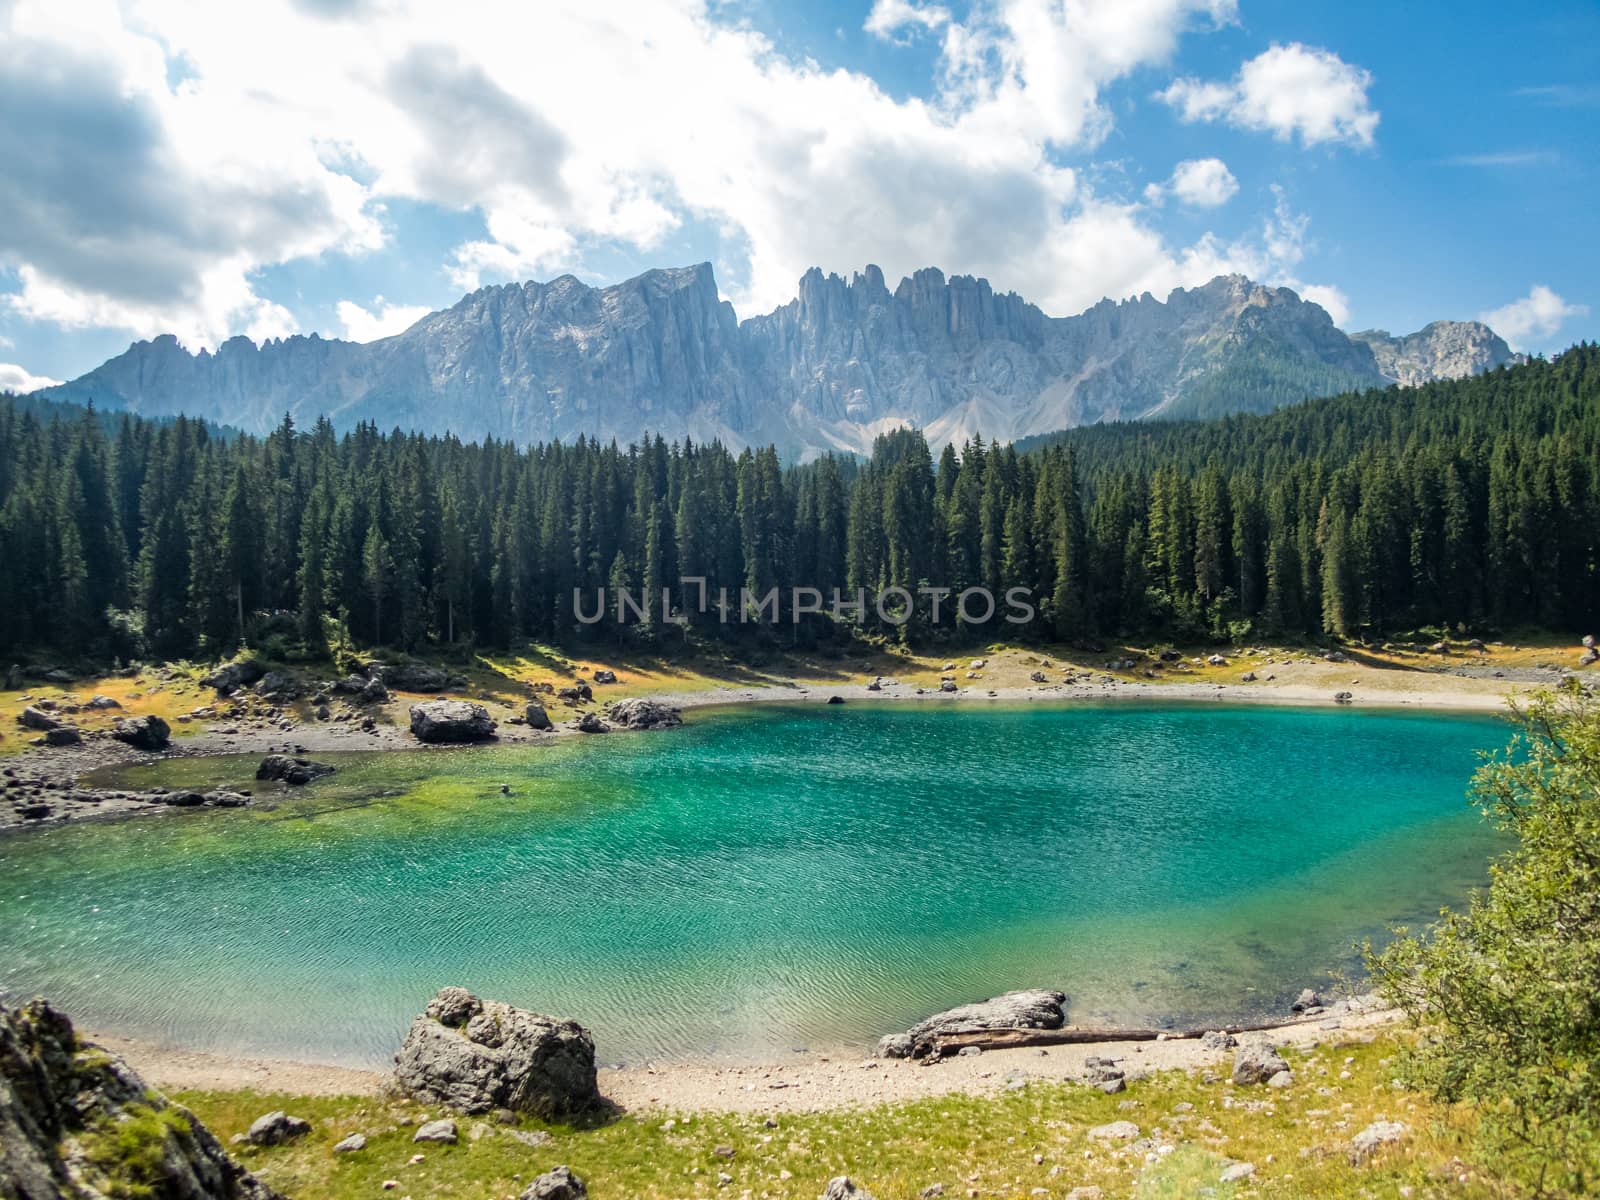 The Karersee below the Karerpass at the foot of the Latemar massif in South Tyrol, Italy